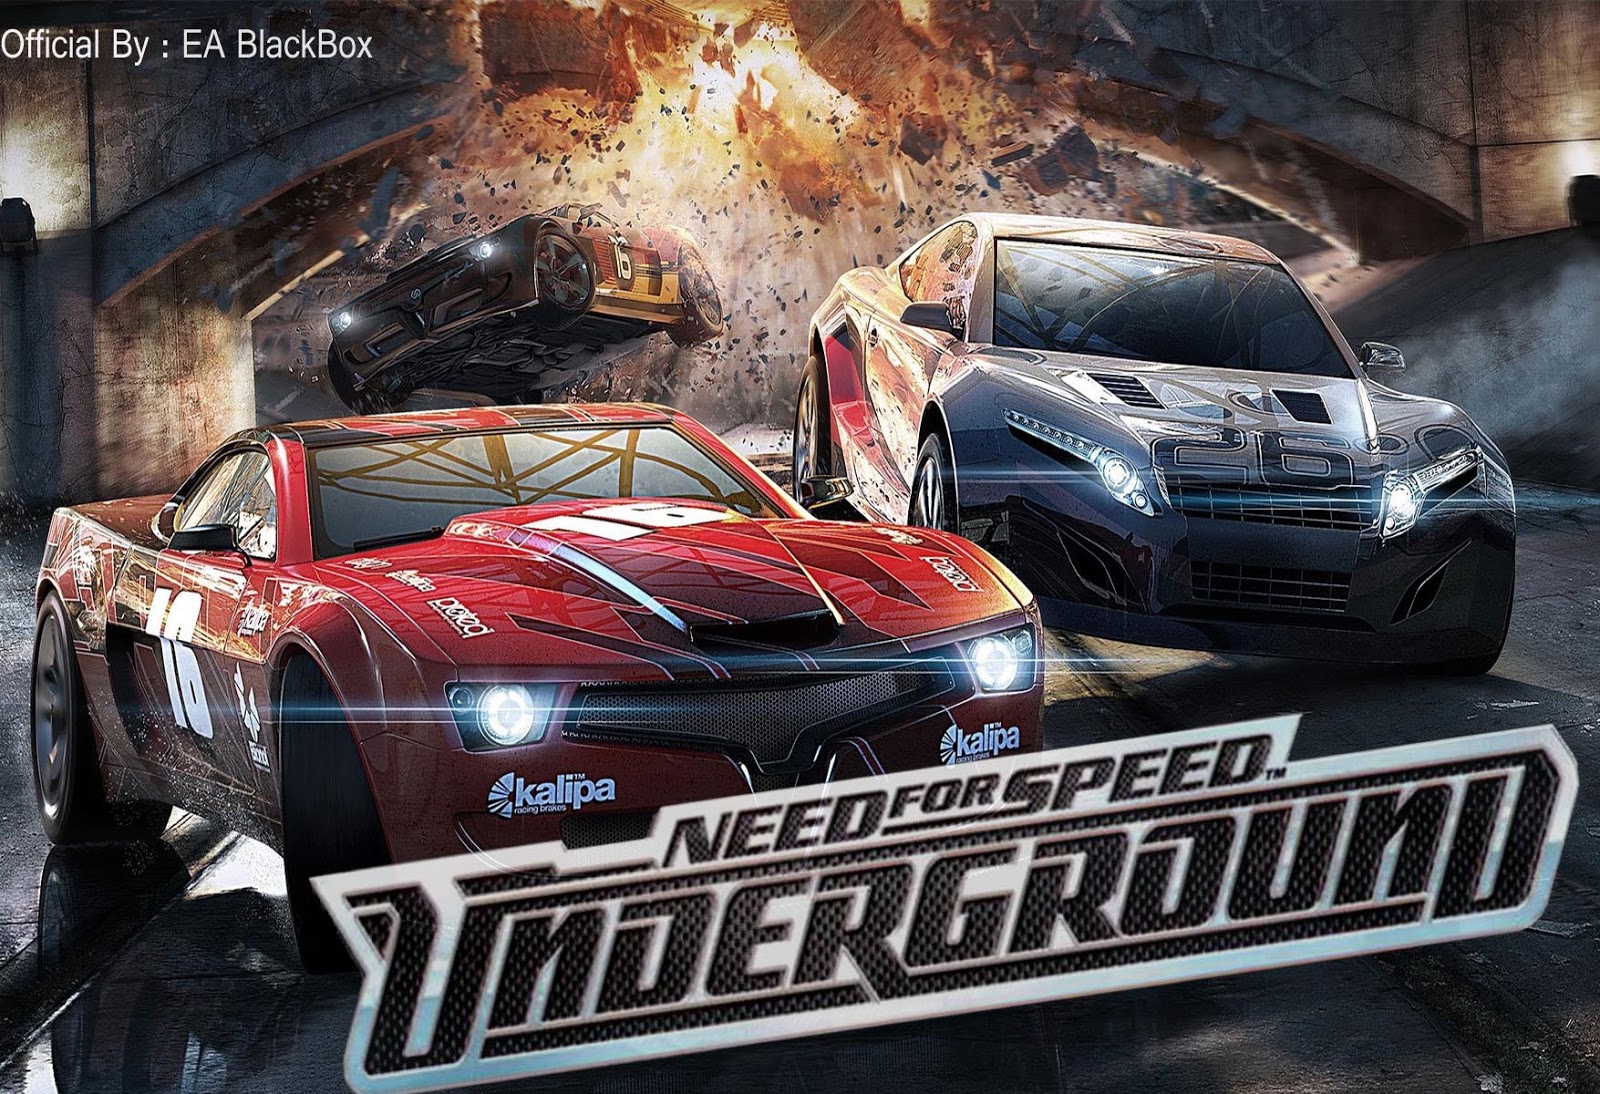 need for speed underground 2 wallpaper,vehicle,racing video game,car,pc game,games